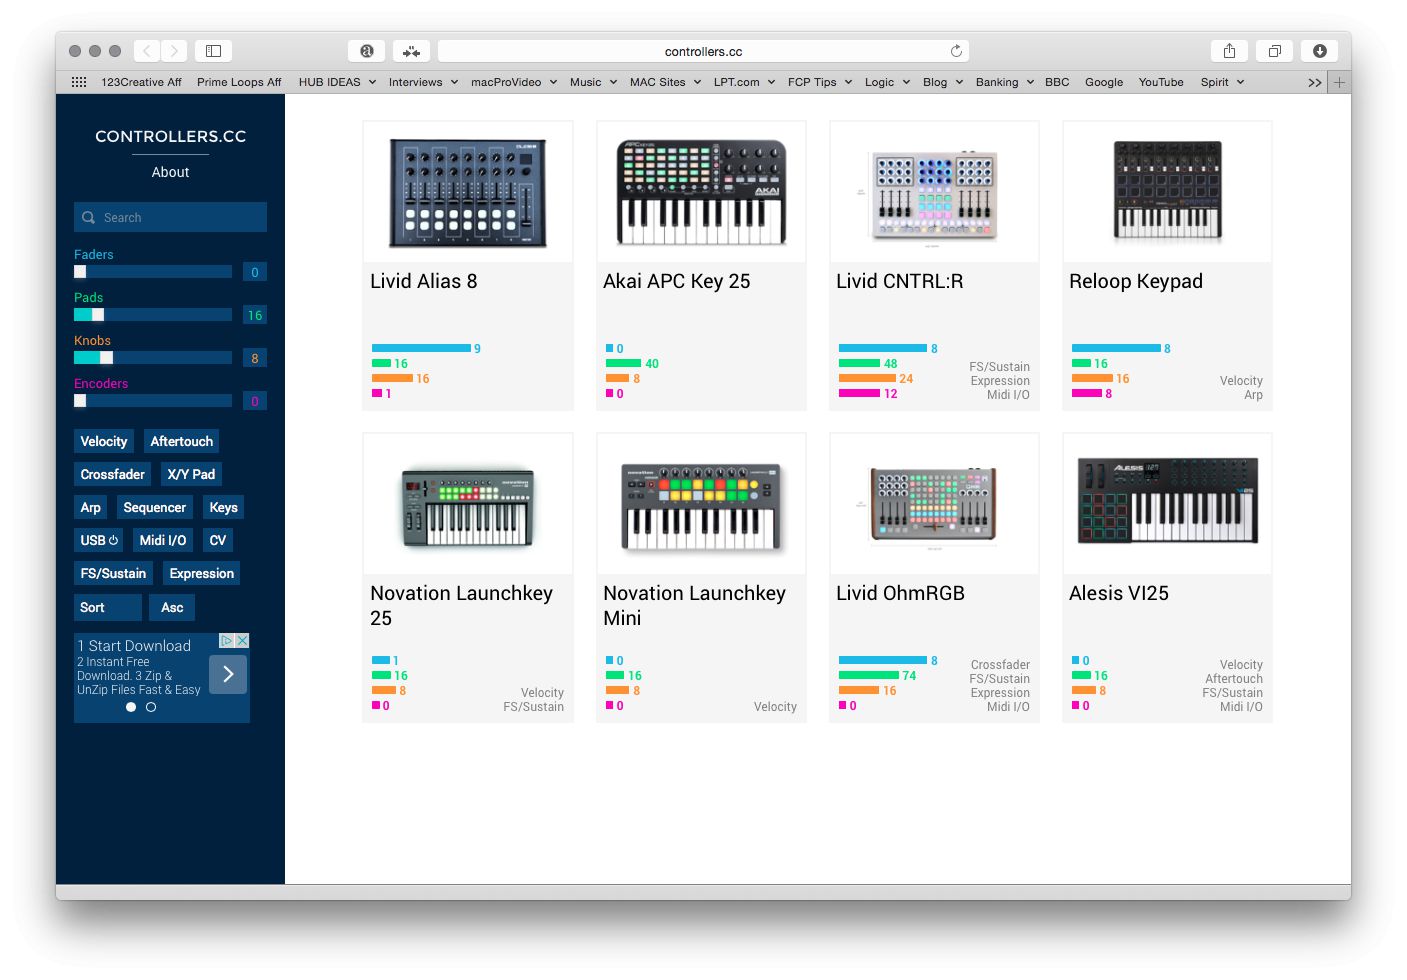 Controller.cc allows you to filter in and filter out a lot of different MIDI controllers to help you find the right one for you.